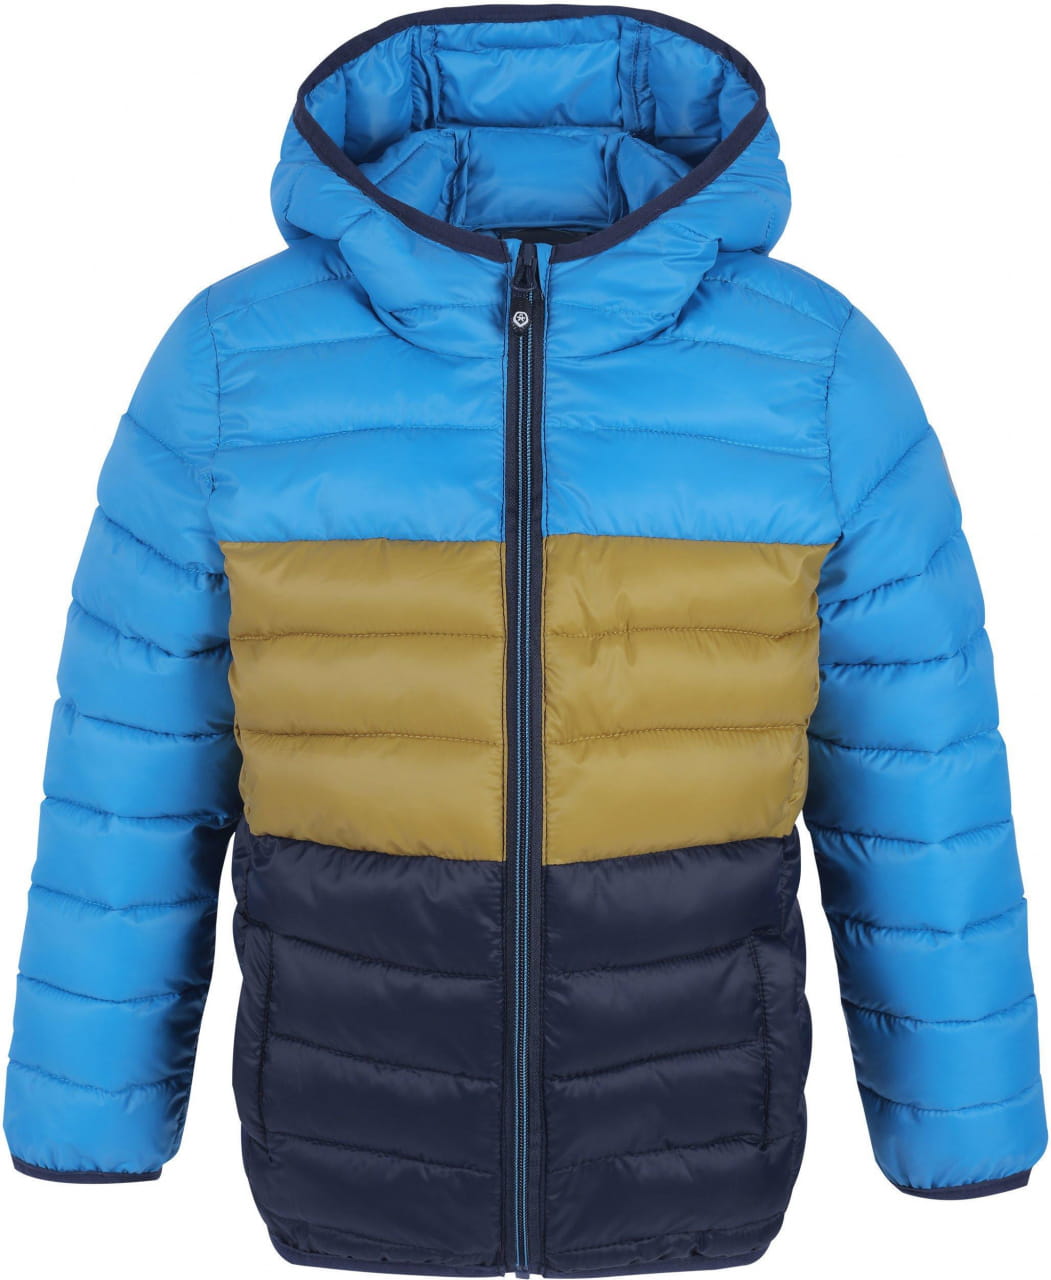 Giacca invernale per bambini Color Kids Jacket w. Hood